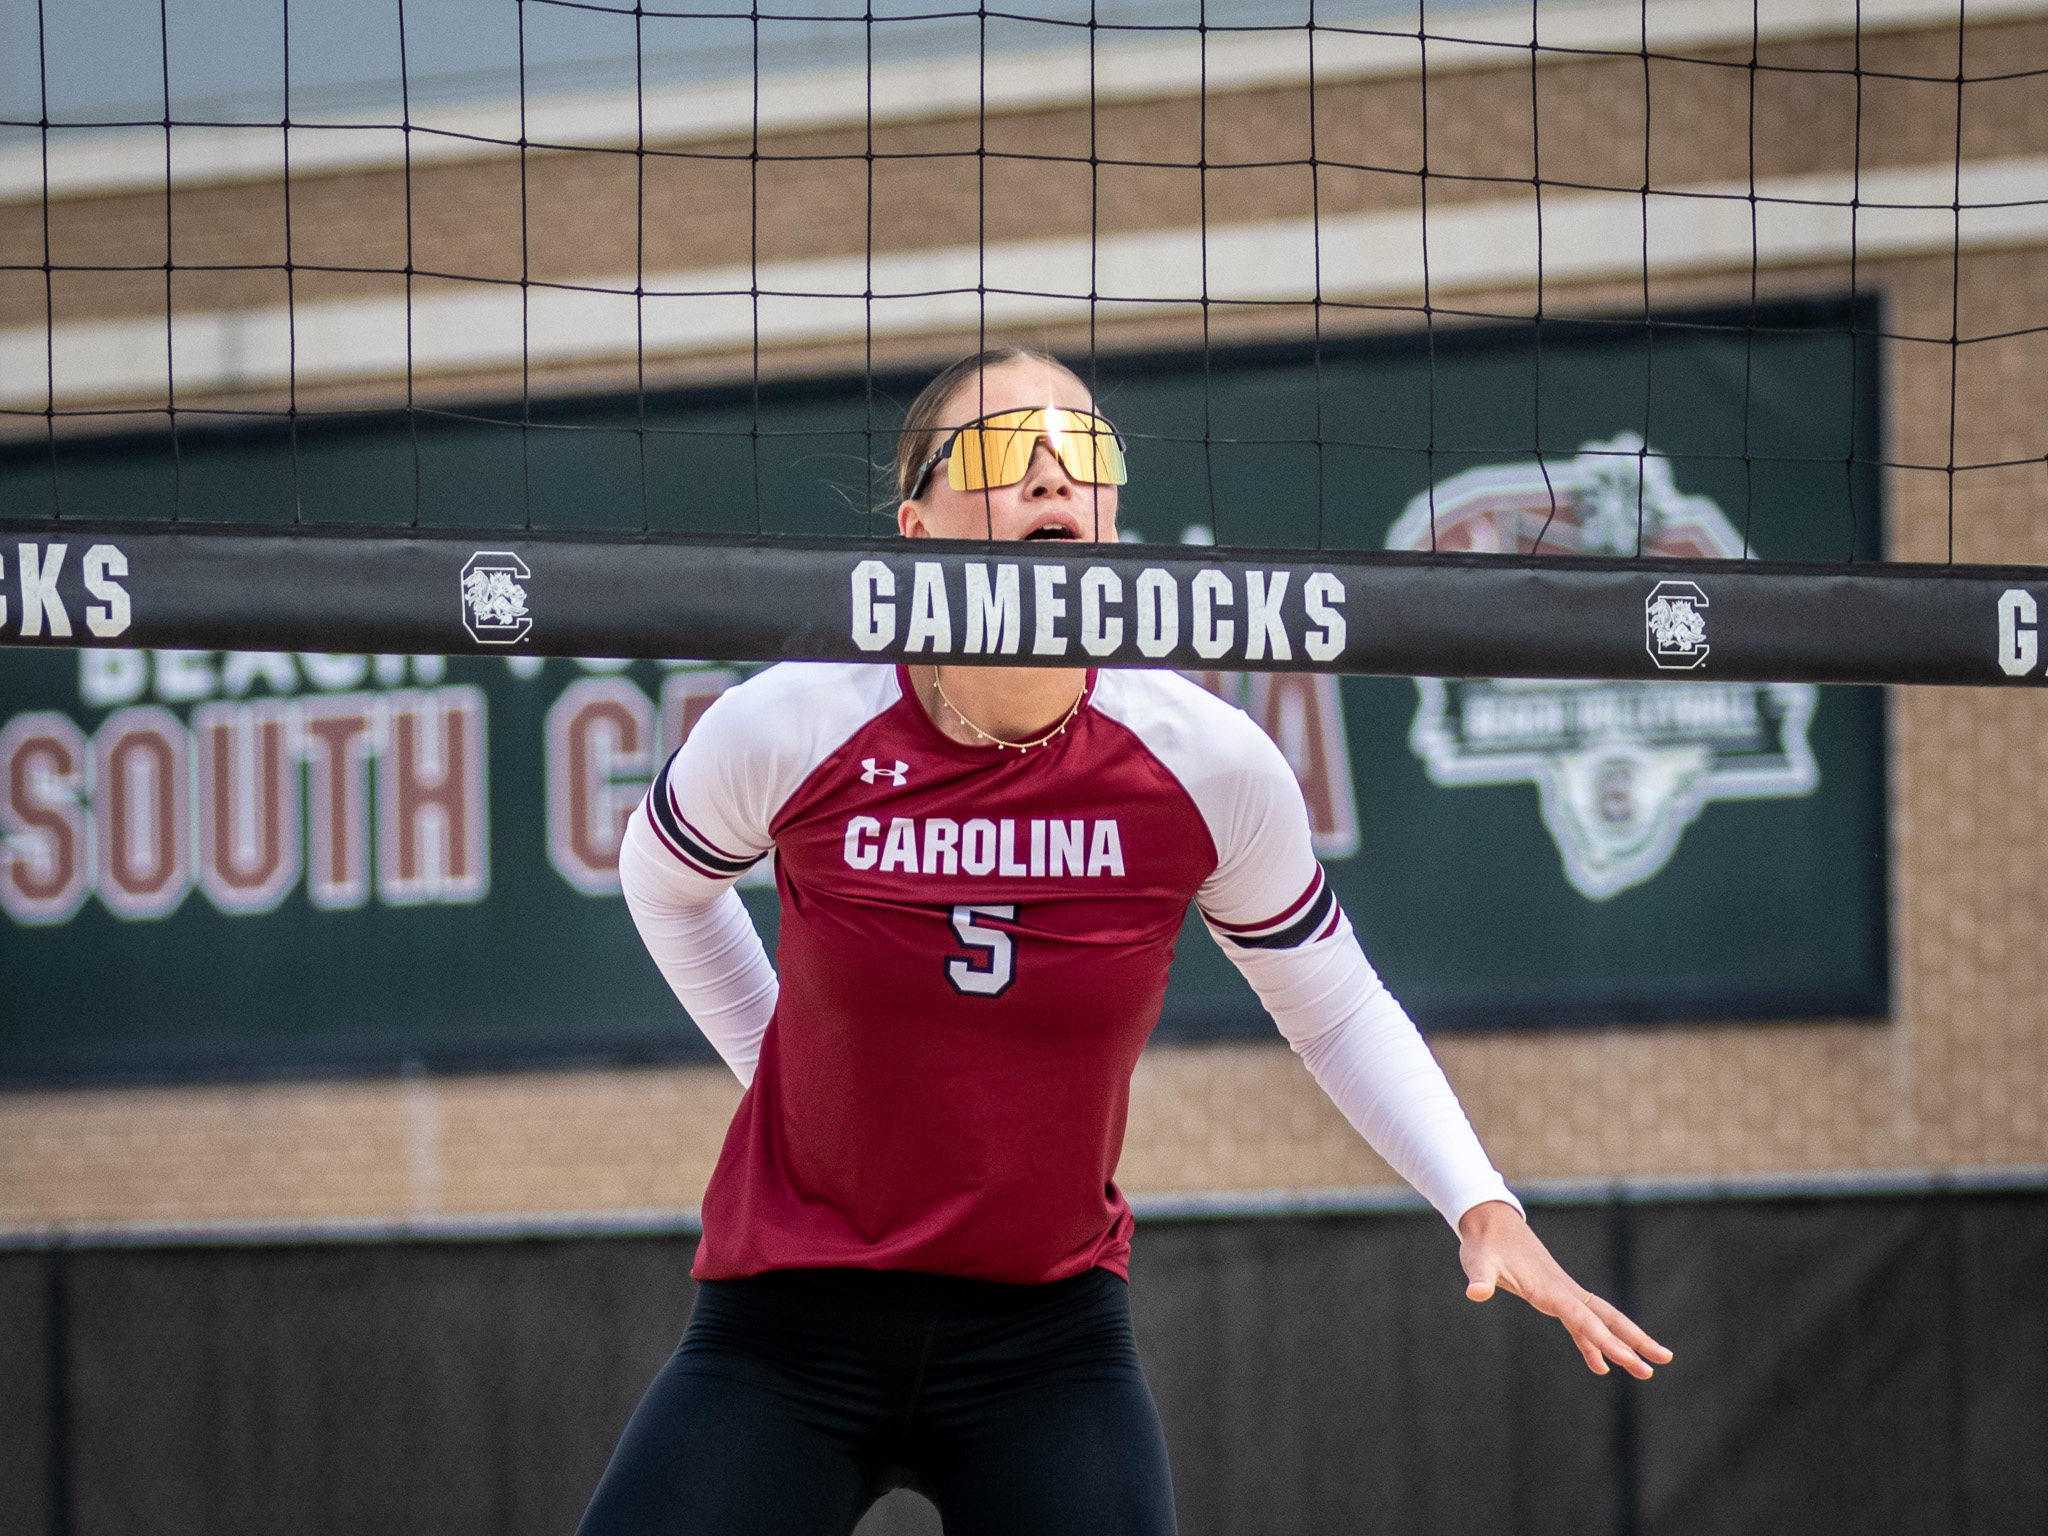 Gamecocks End Sunday With Sweep of Jacksonville